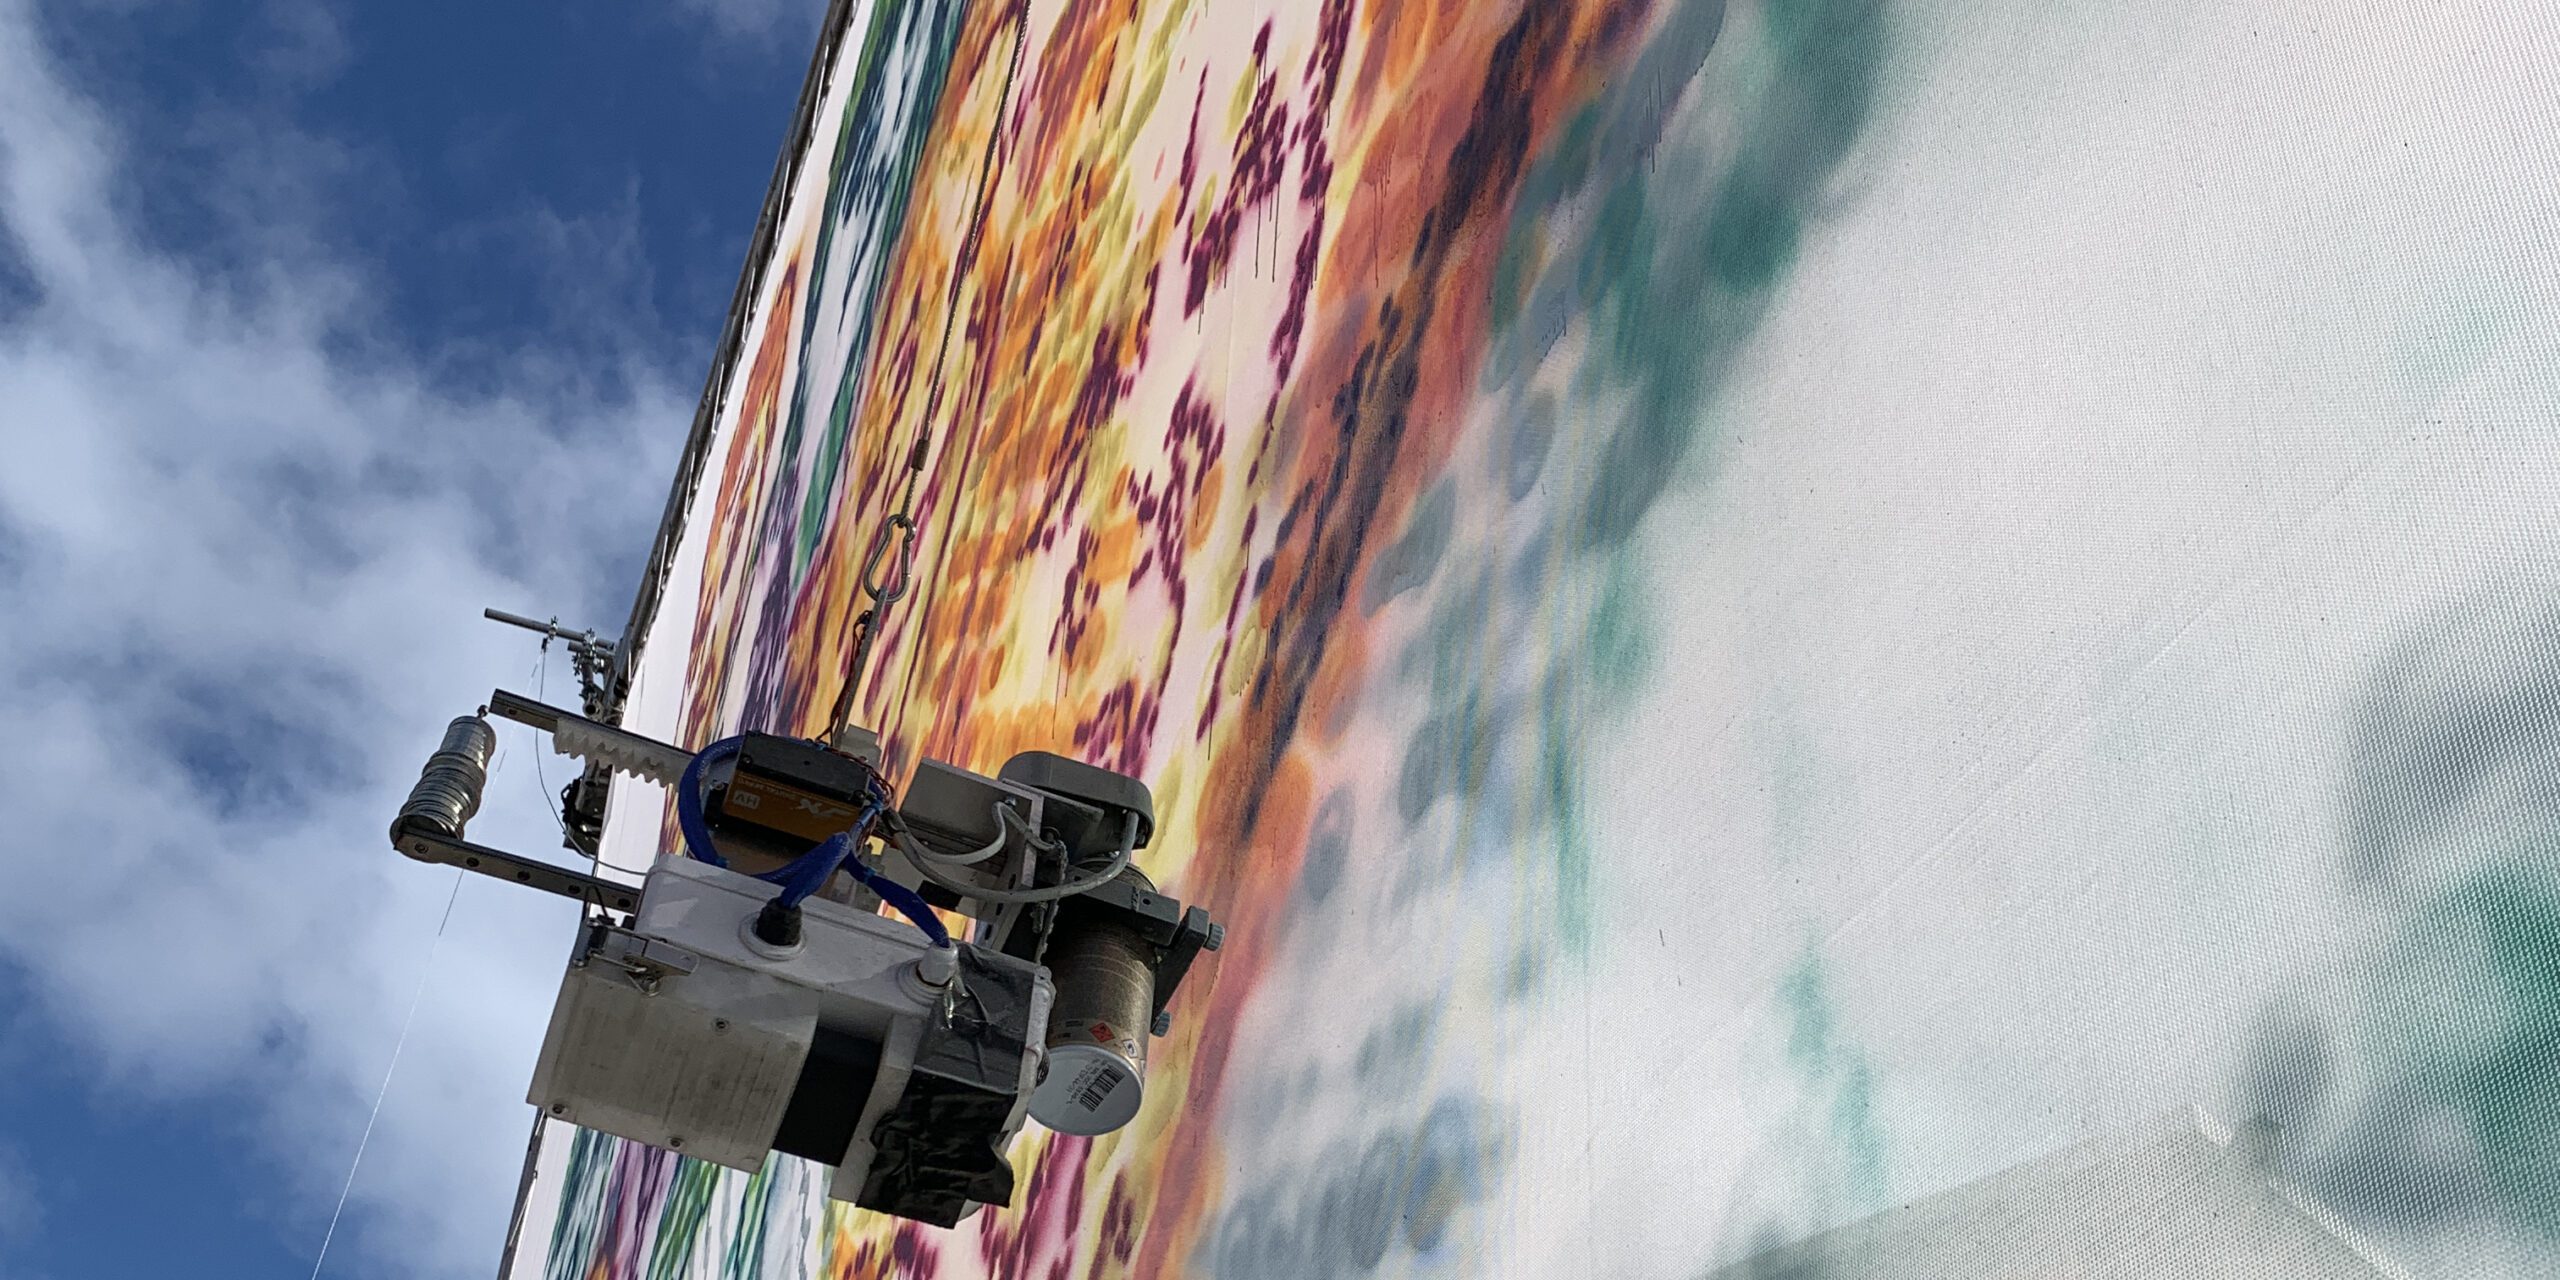 A close-up of the robot spray painting the canvas